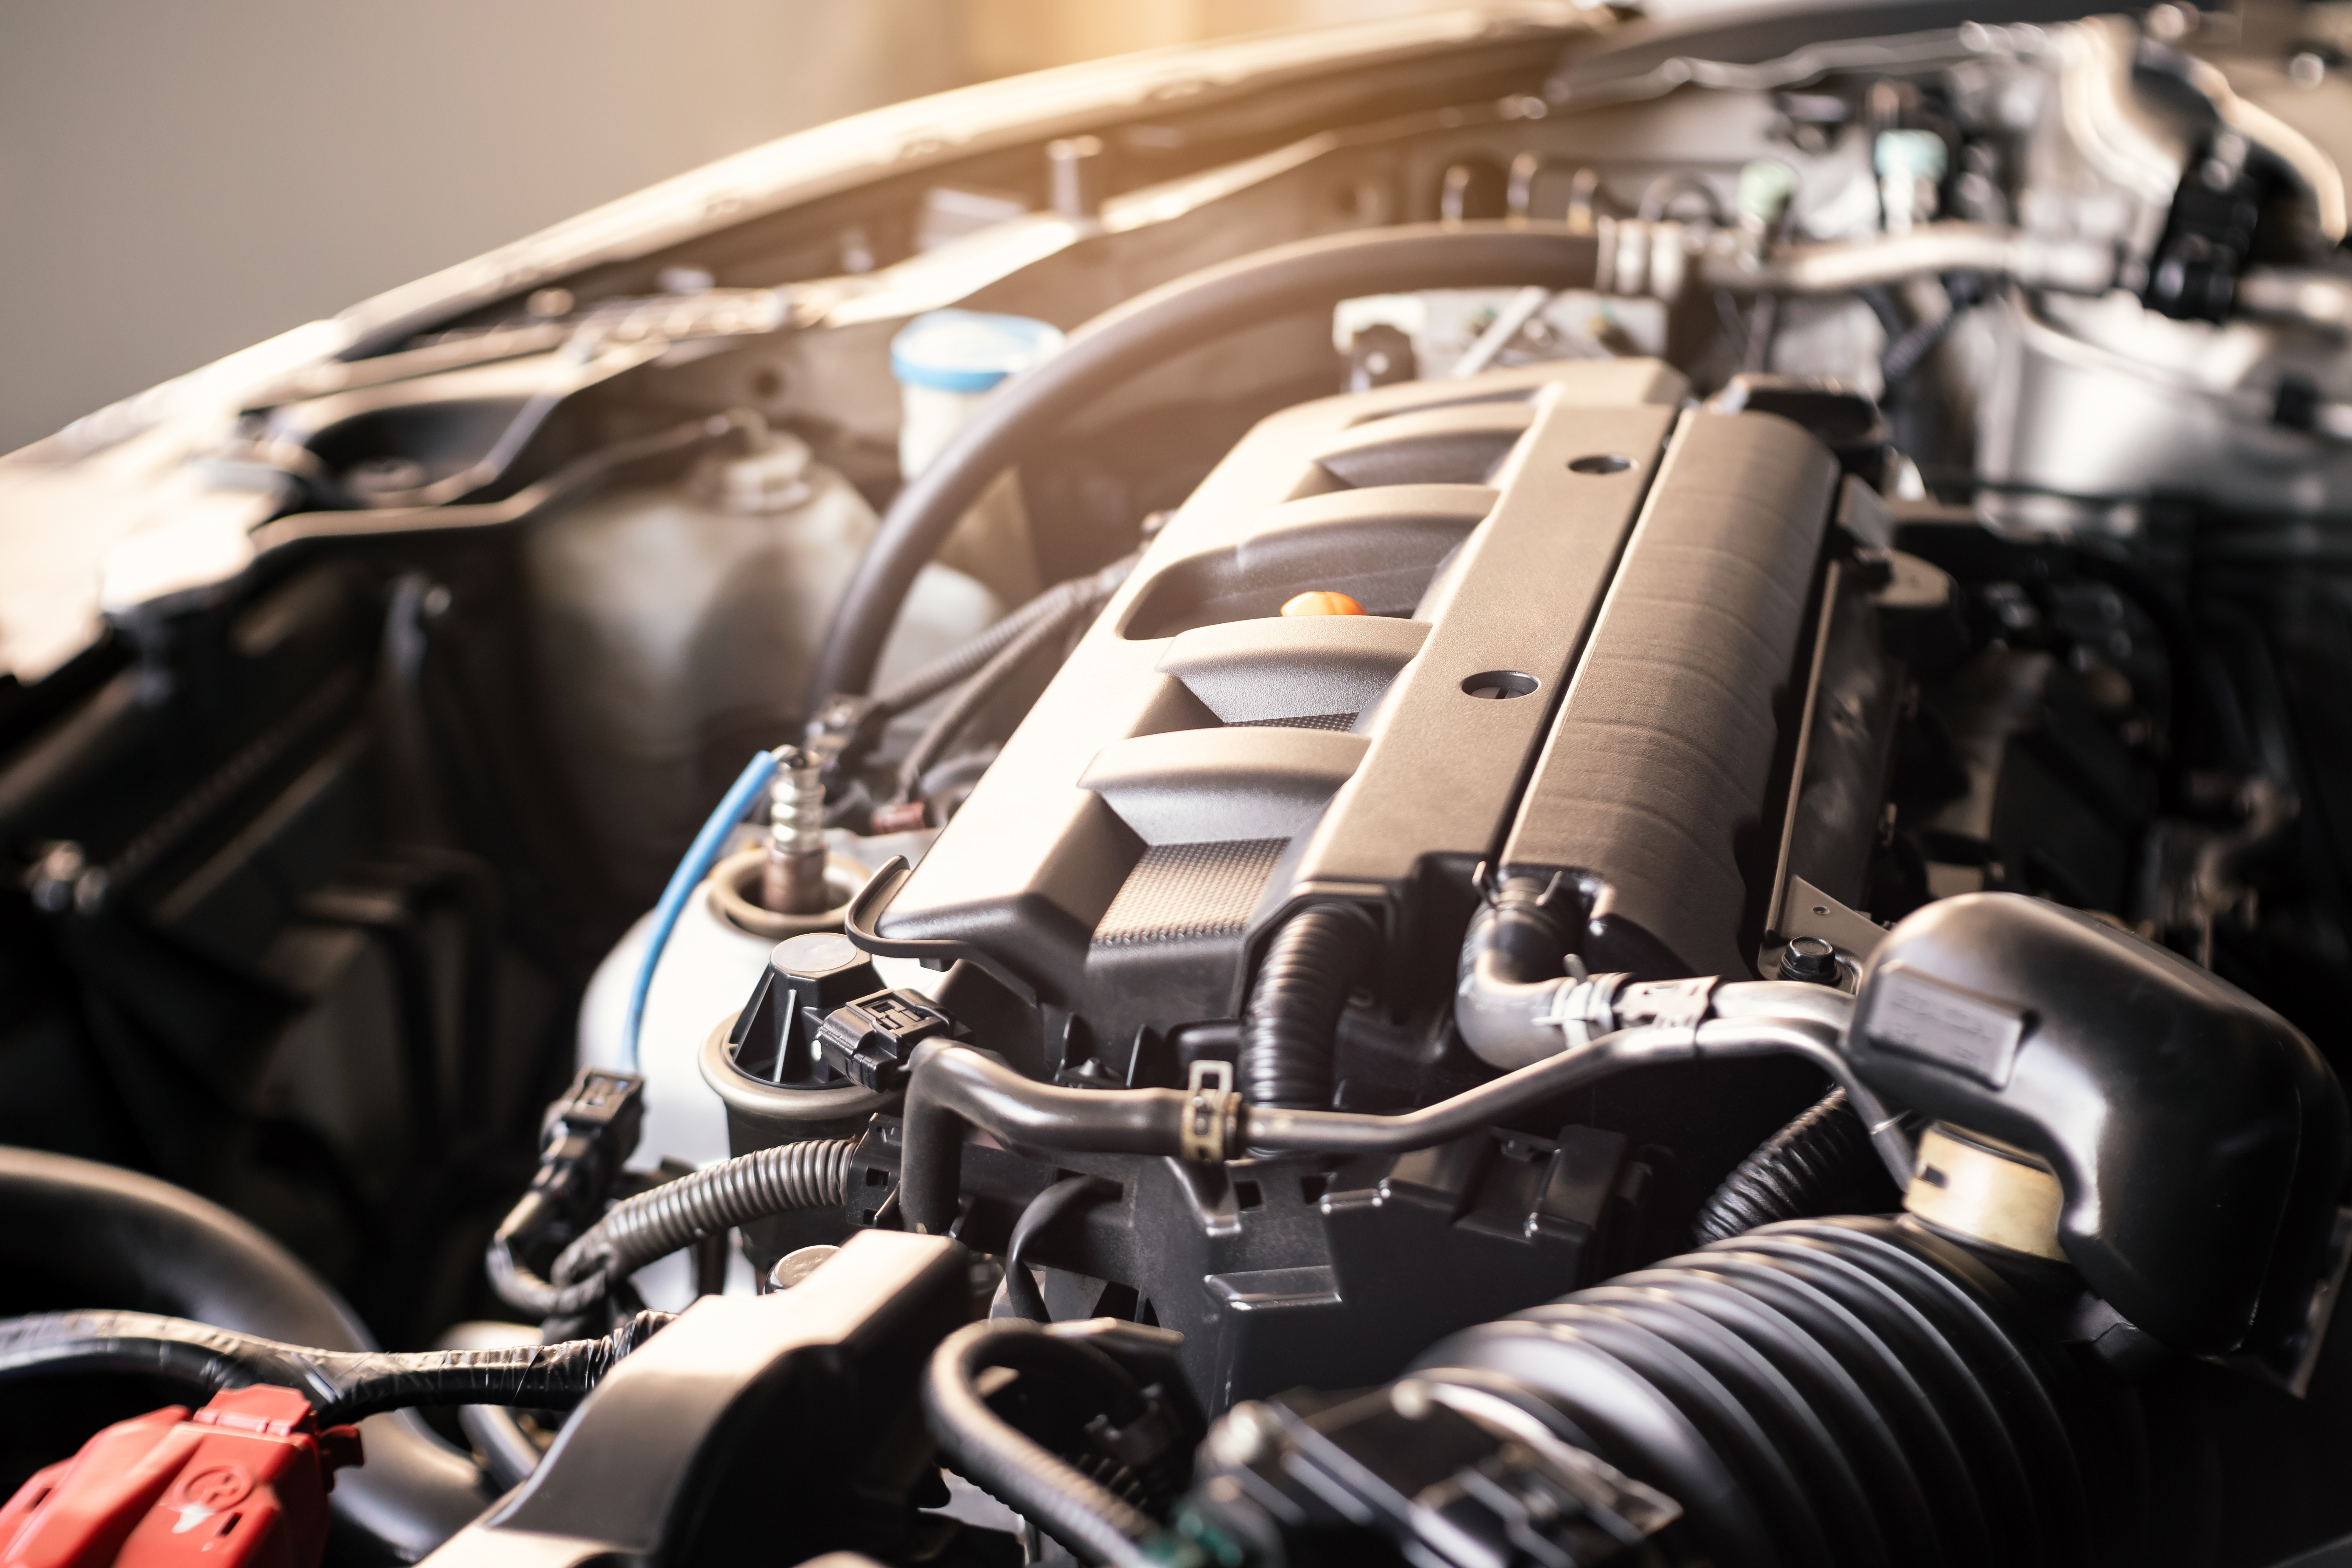 A diesel combustion engine - learn why getting intake manifold cleaning in Roanoke, VA is so important.